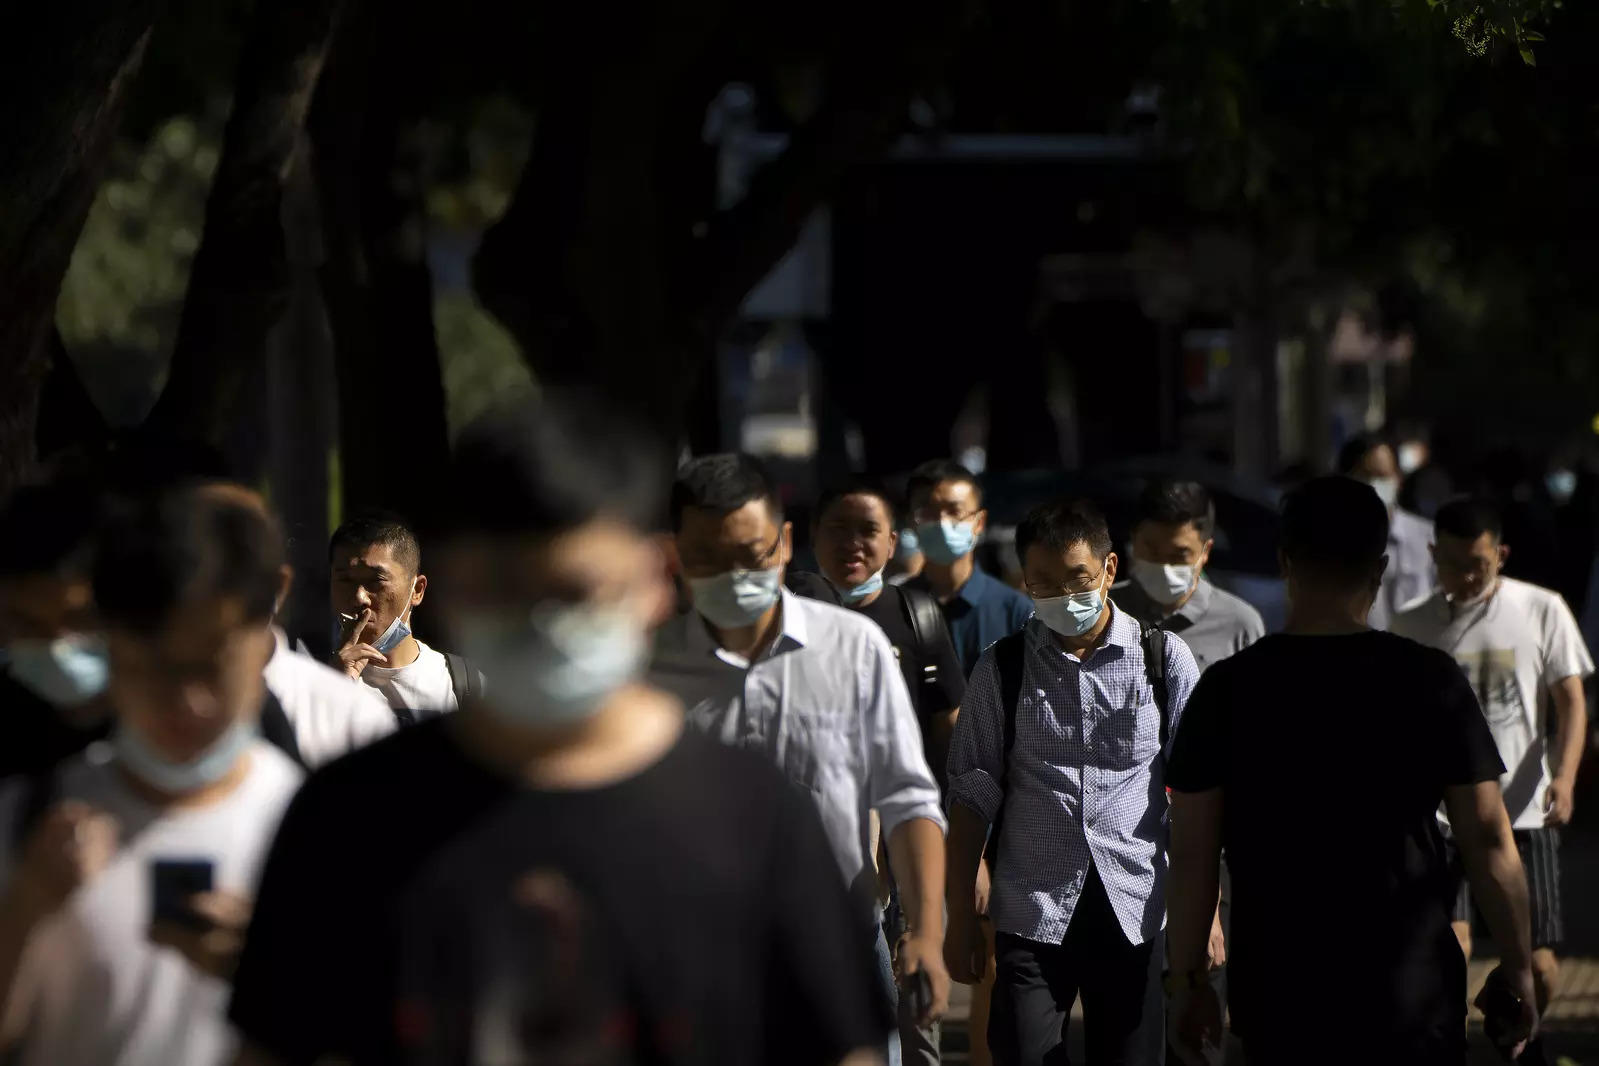   Commuters wearing face masks walk along a street in the central business district in Beijing.